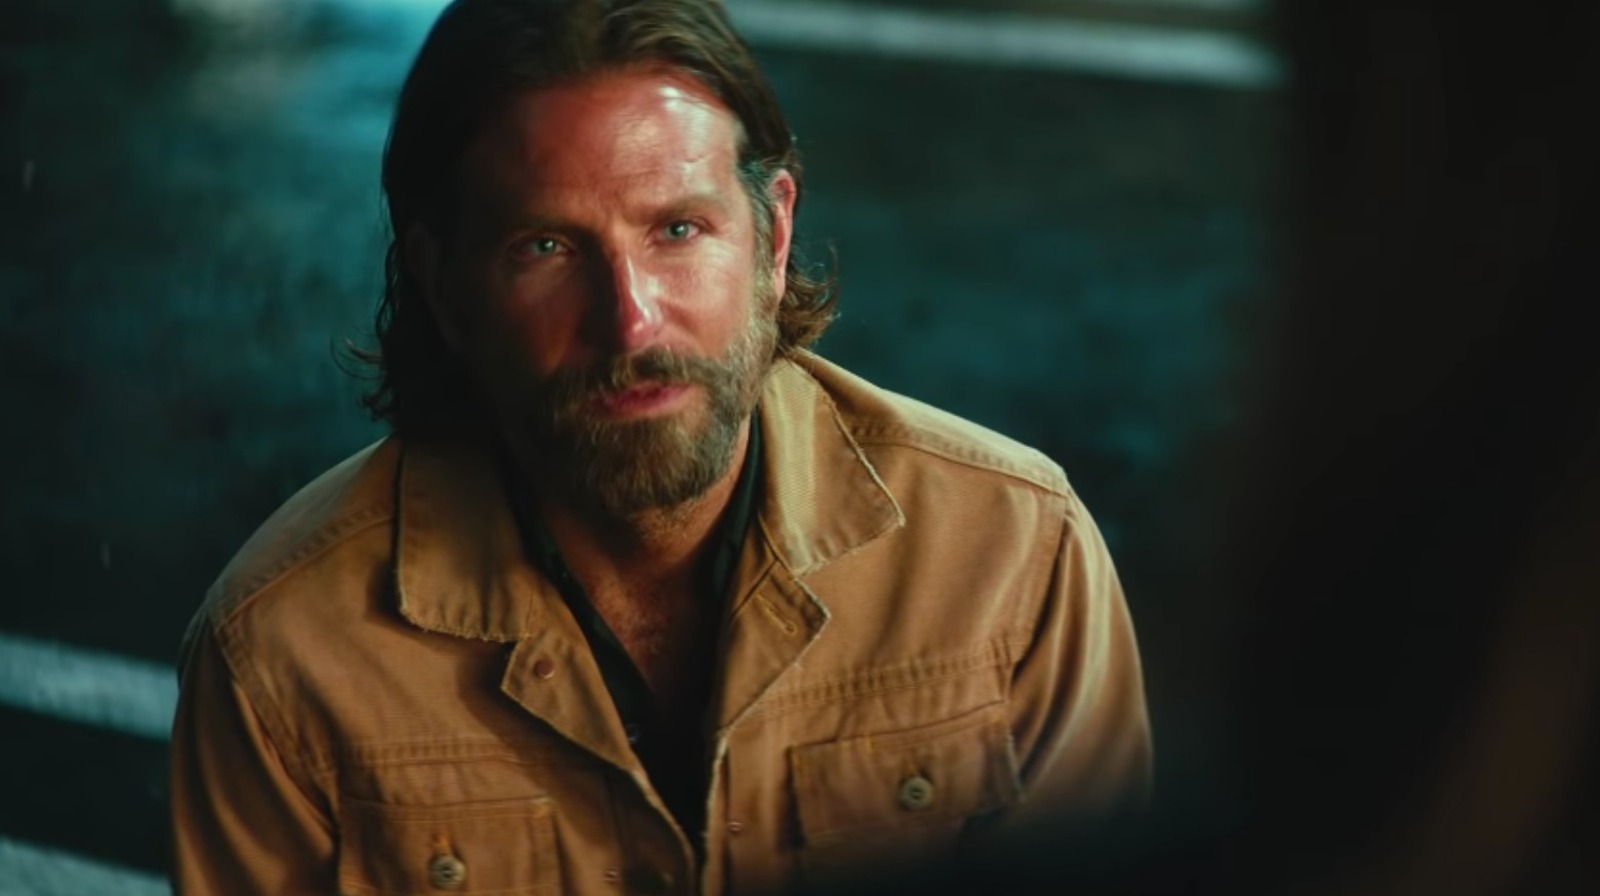 Bradley Cooper is still waiting for his turn to campaign for passion  project, Maestro, as the full trailer is released